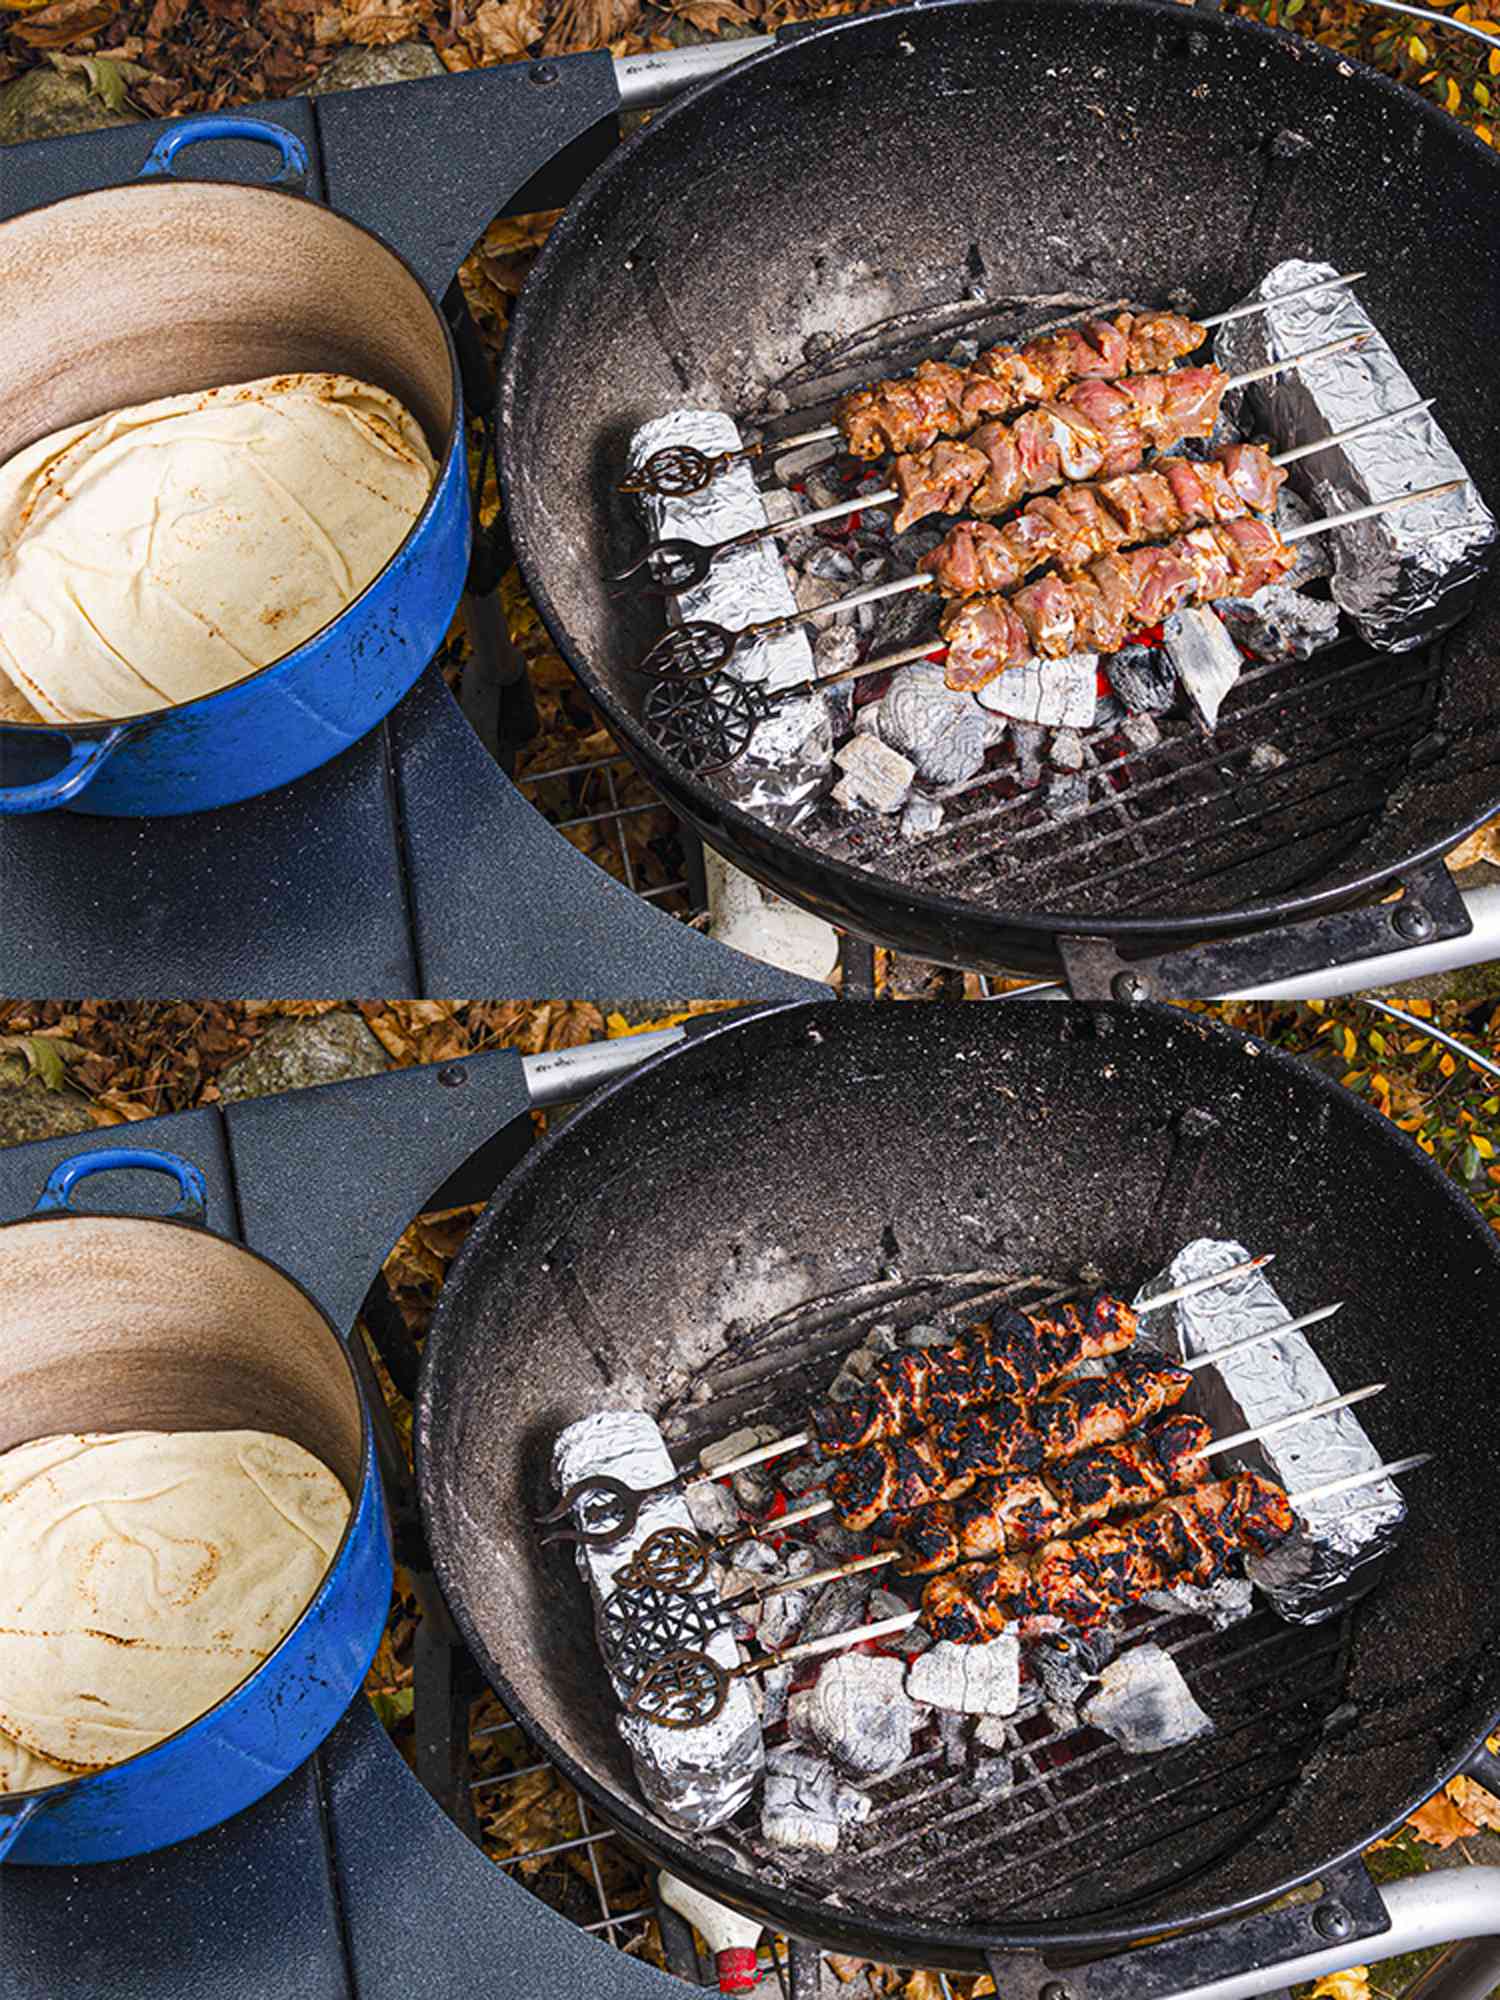 Two Image collage of skewers before and after cooking on the charcoal grill